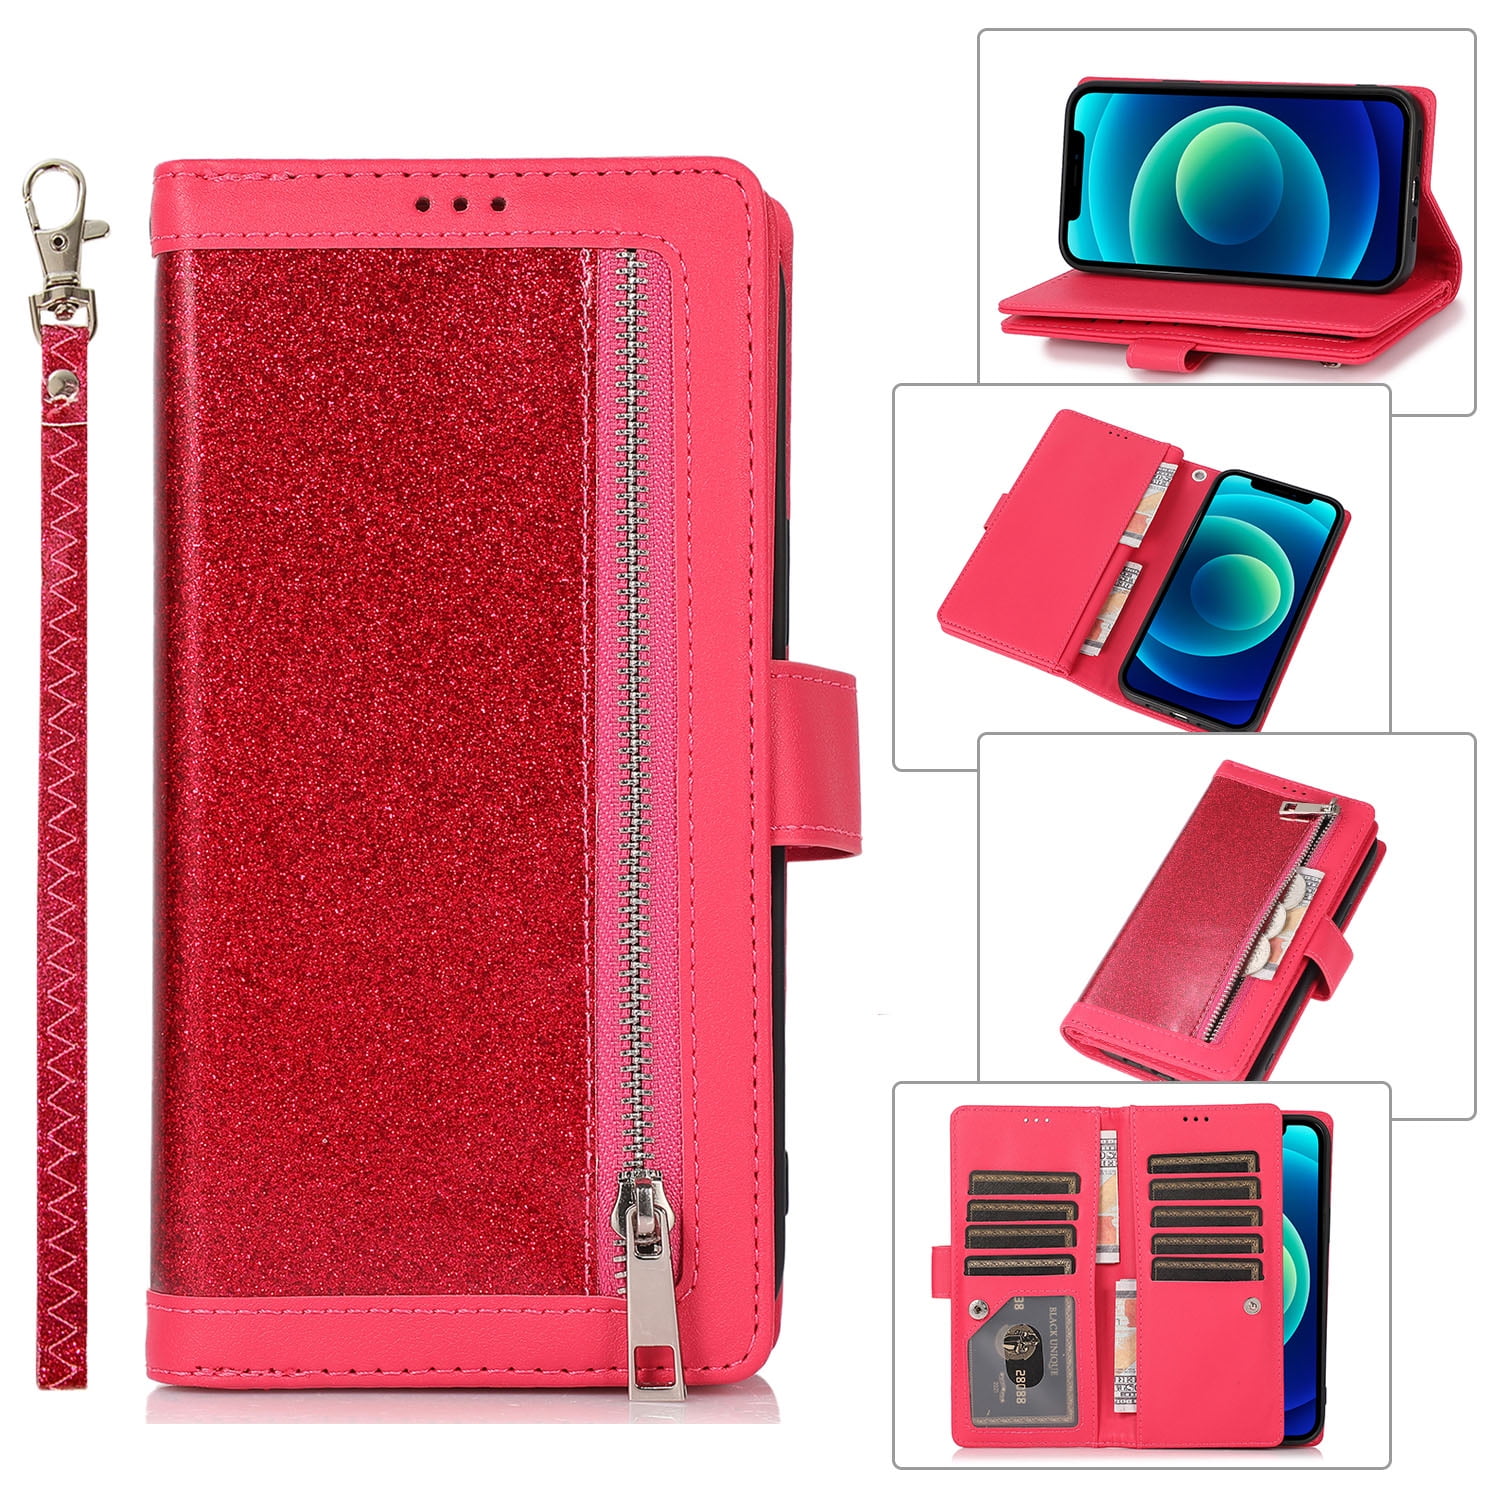 Funyye Colorful Scratch Resistant Premium Magnetic Detachable PU Leather Wallet Style Cover with LG G6 Case Full Body protection with Stand Folio Book Style Ultra Thin Nice Drawing Patterns Protective Credit Card Holder Slots with Free Screen Protector